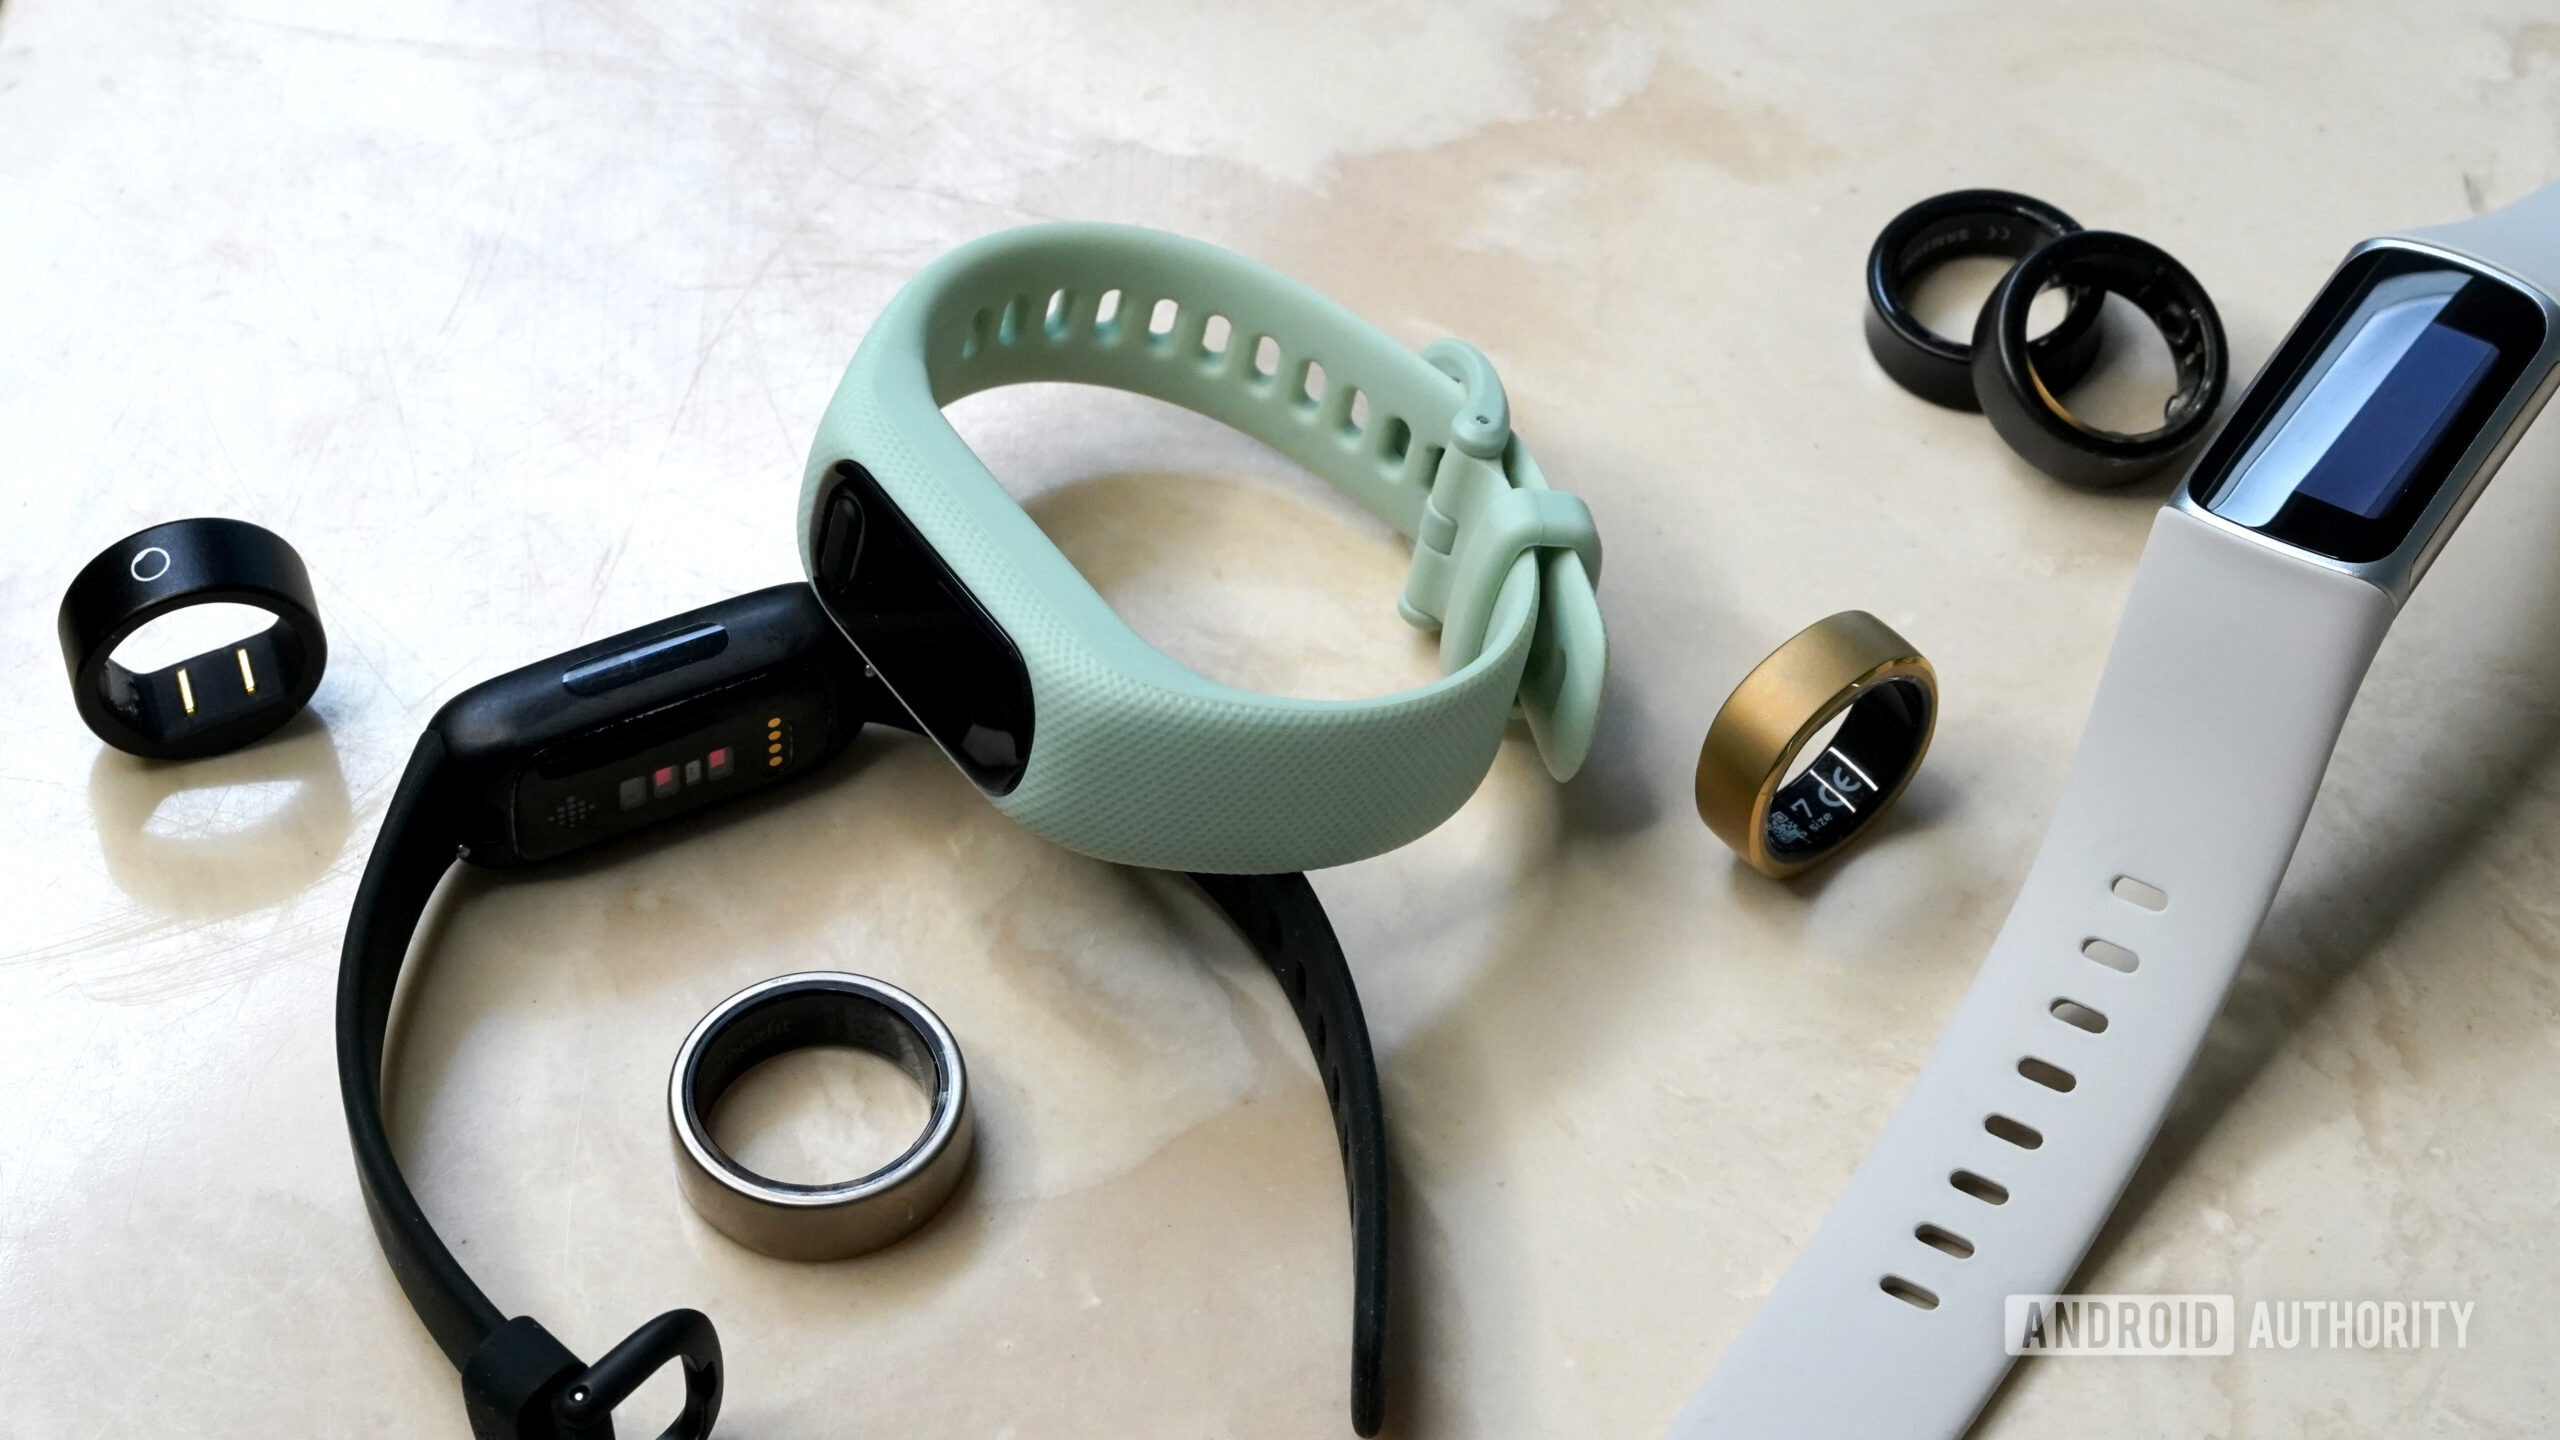 Will smart rings edge out traditional fitness trackers?